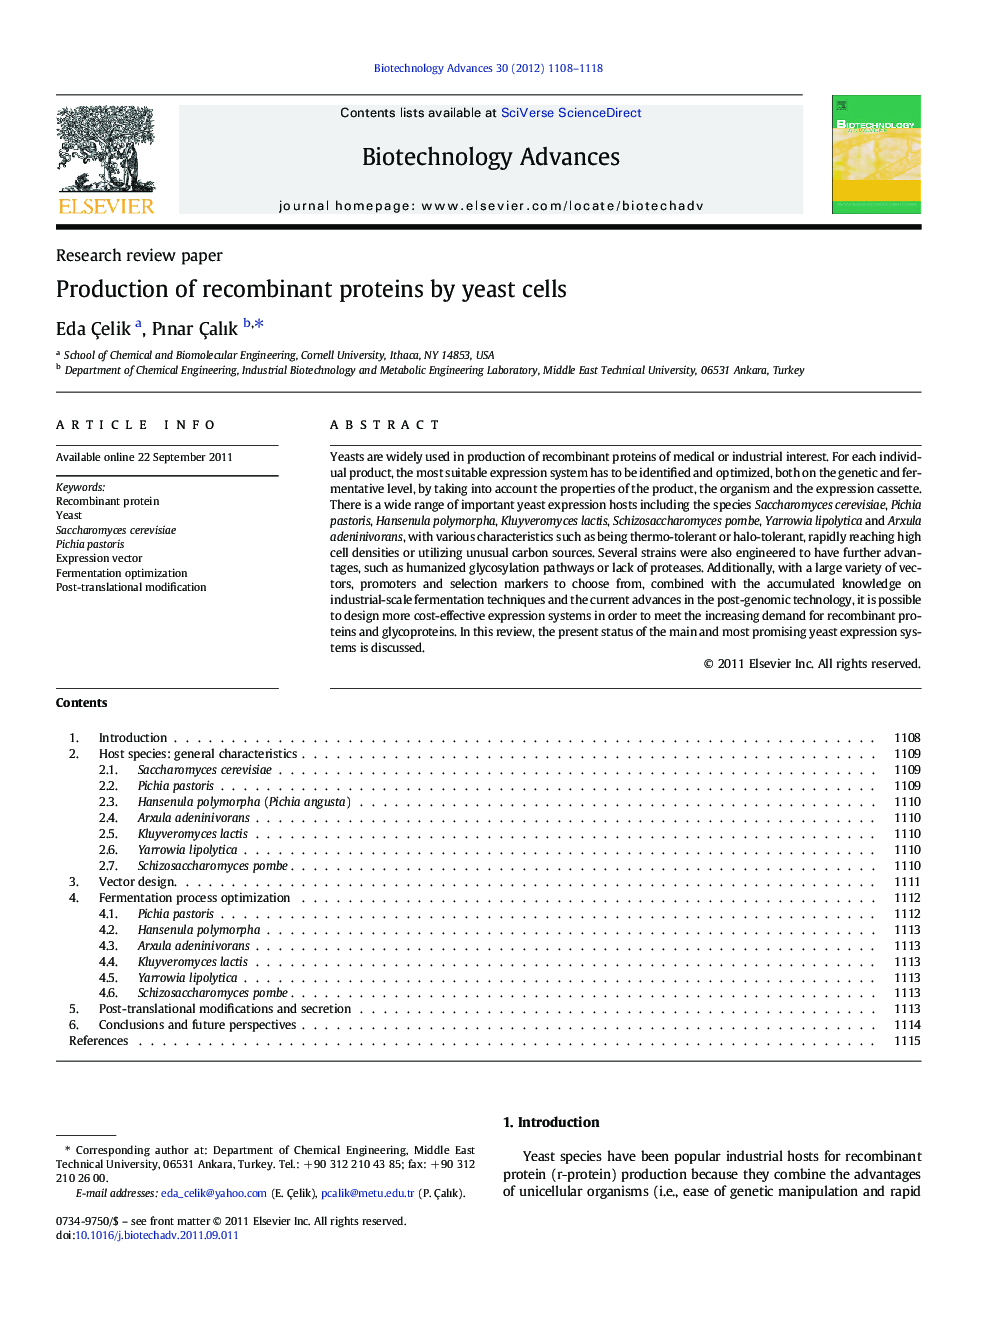 Production of recombinant proteins by yeast cells